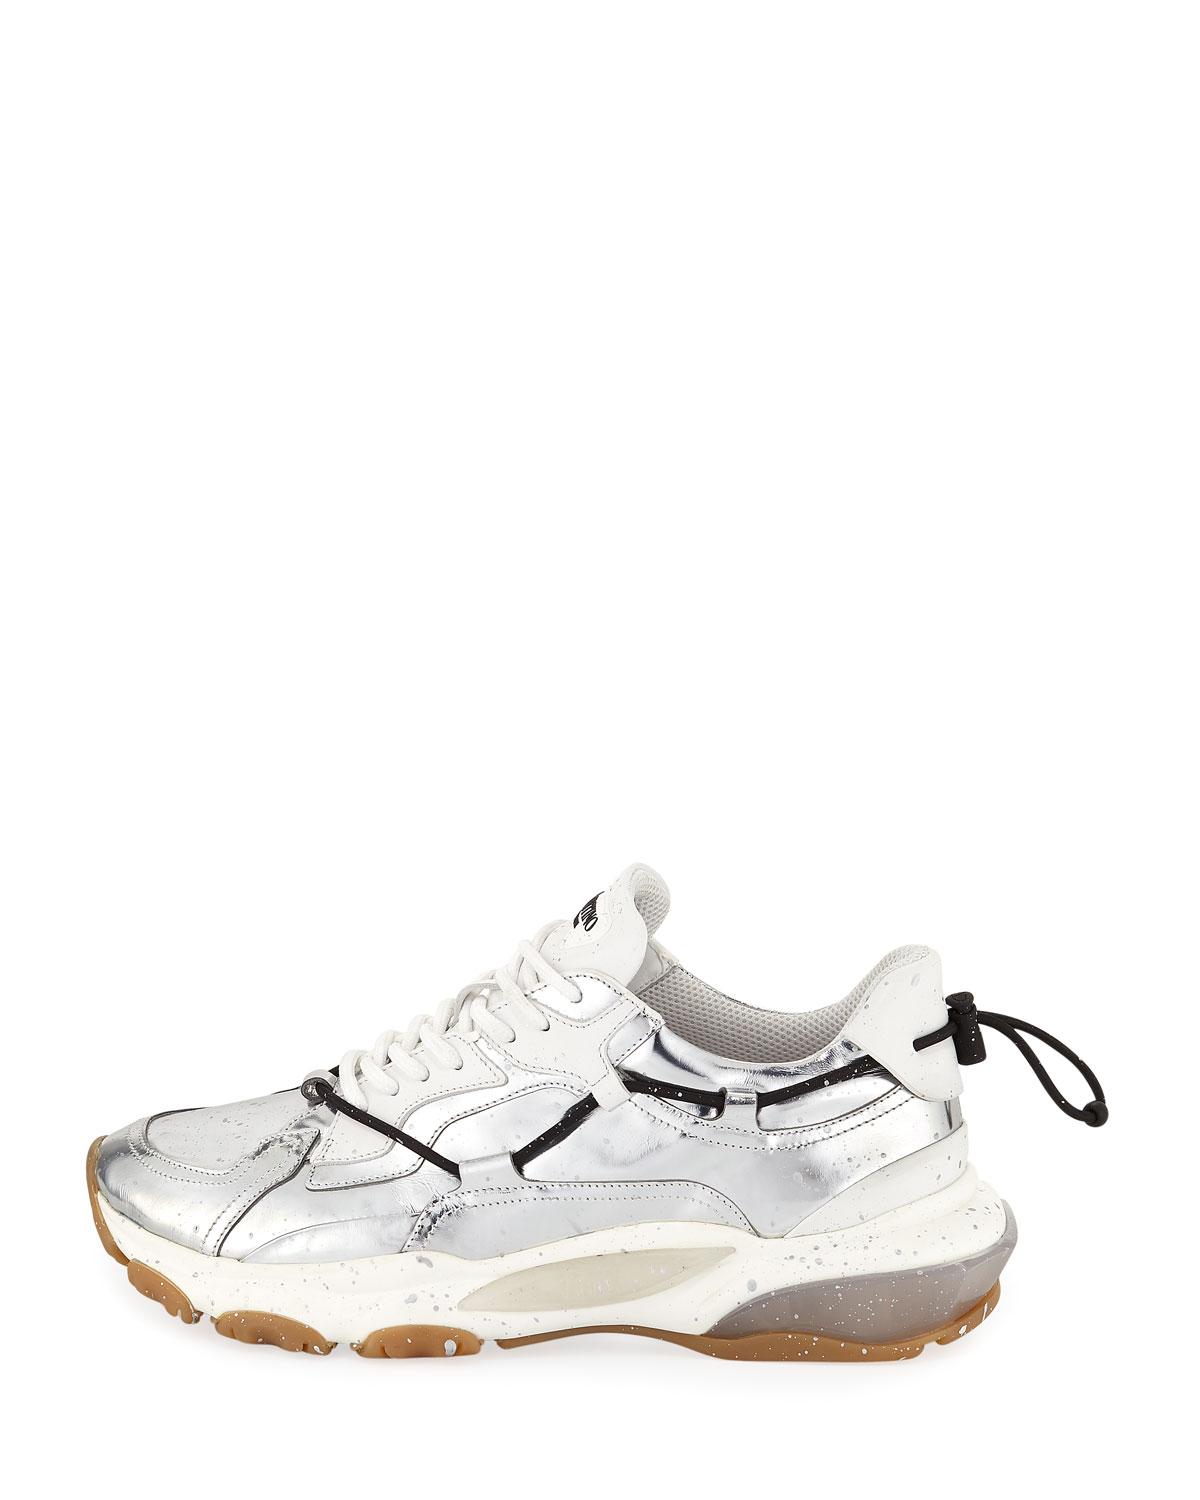 valentino dad sneakers